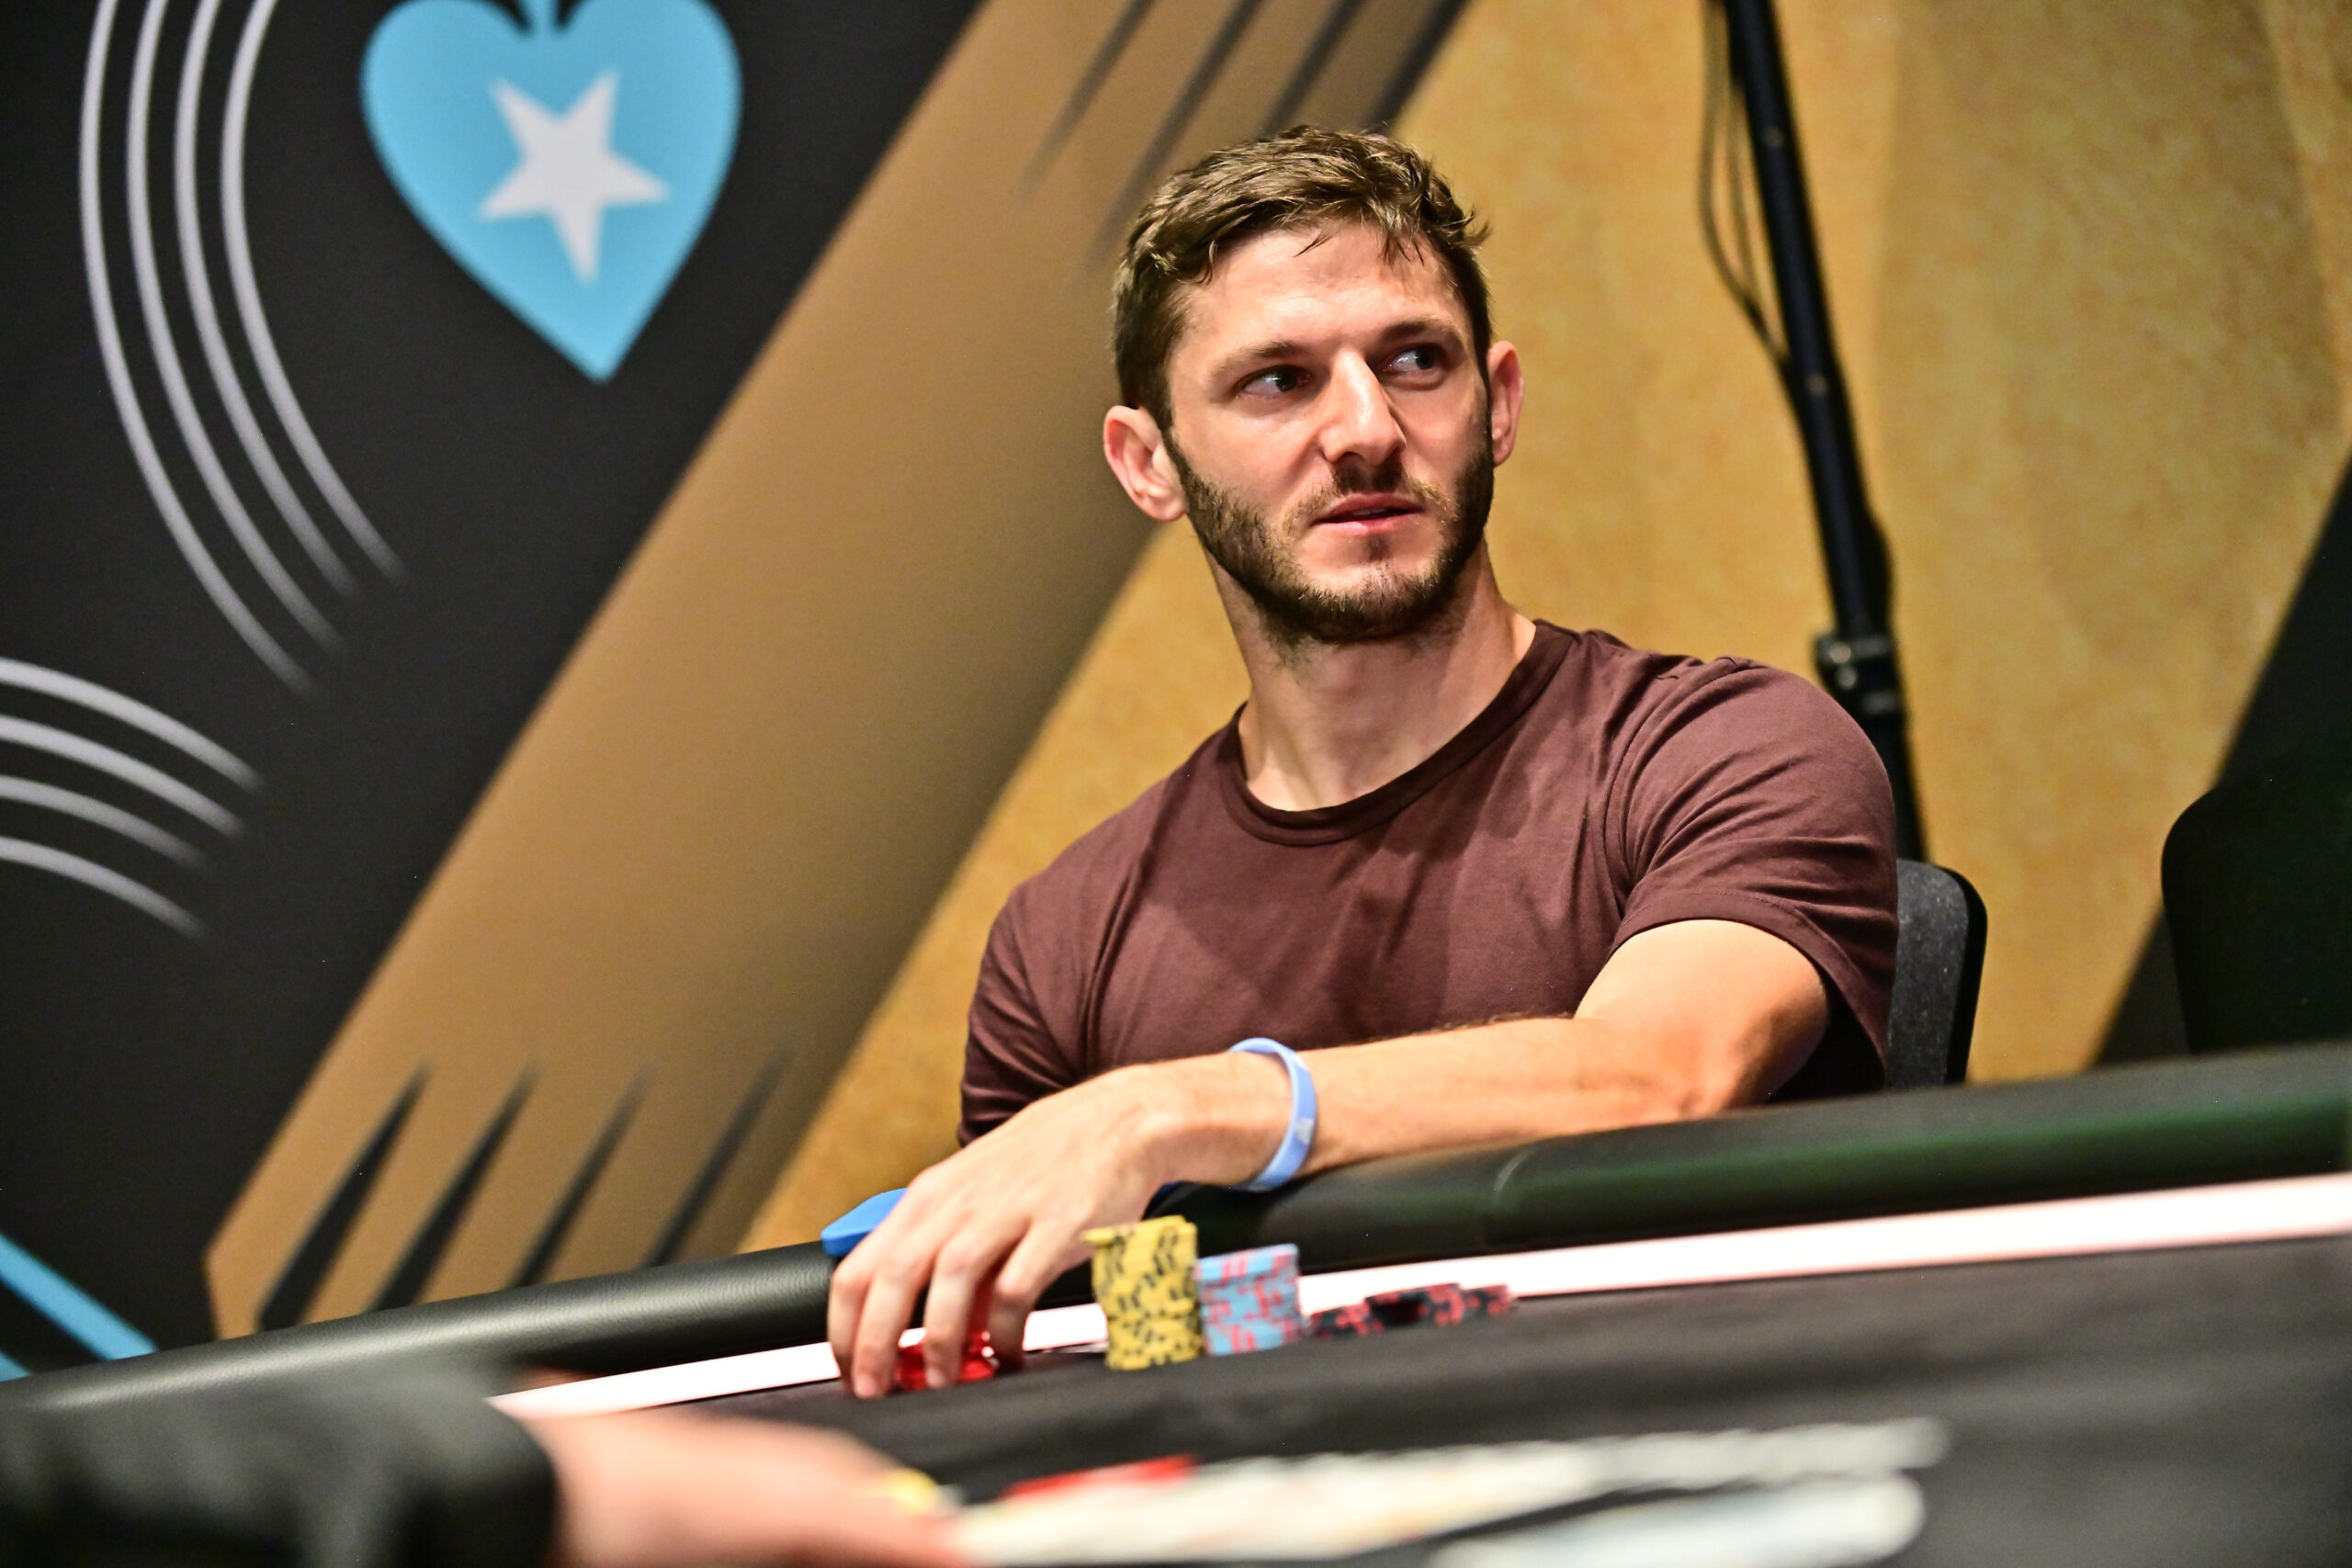 Jonathan Jaffe chip leads the $25K, hot off a win in the $50K